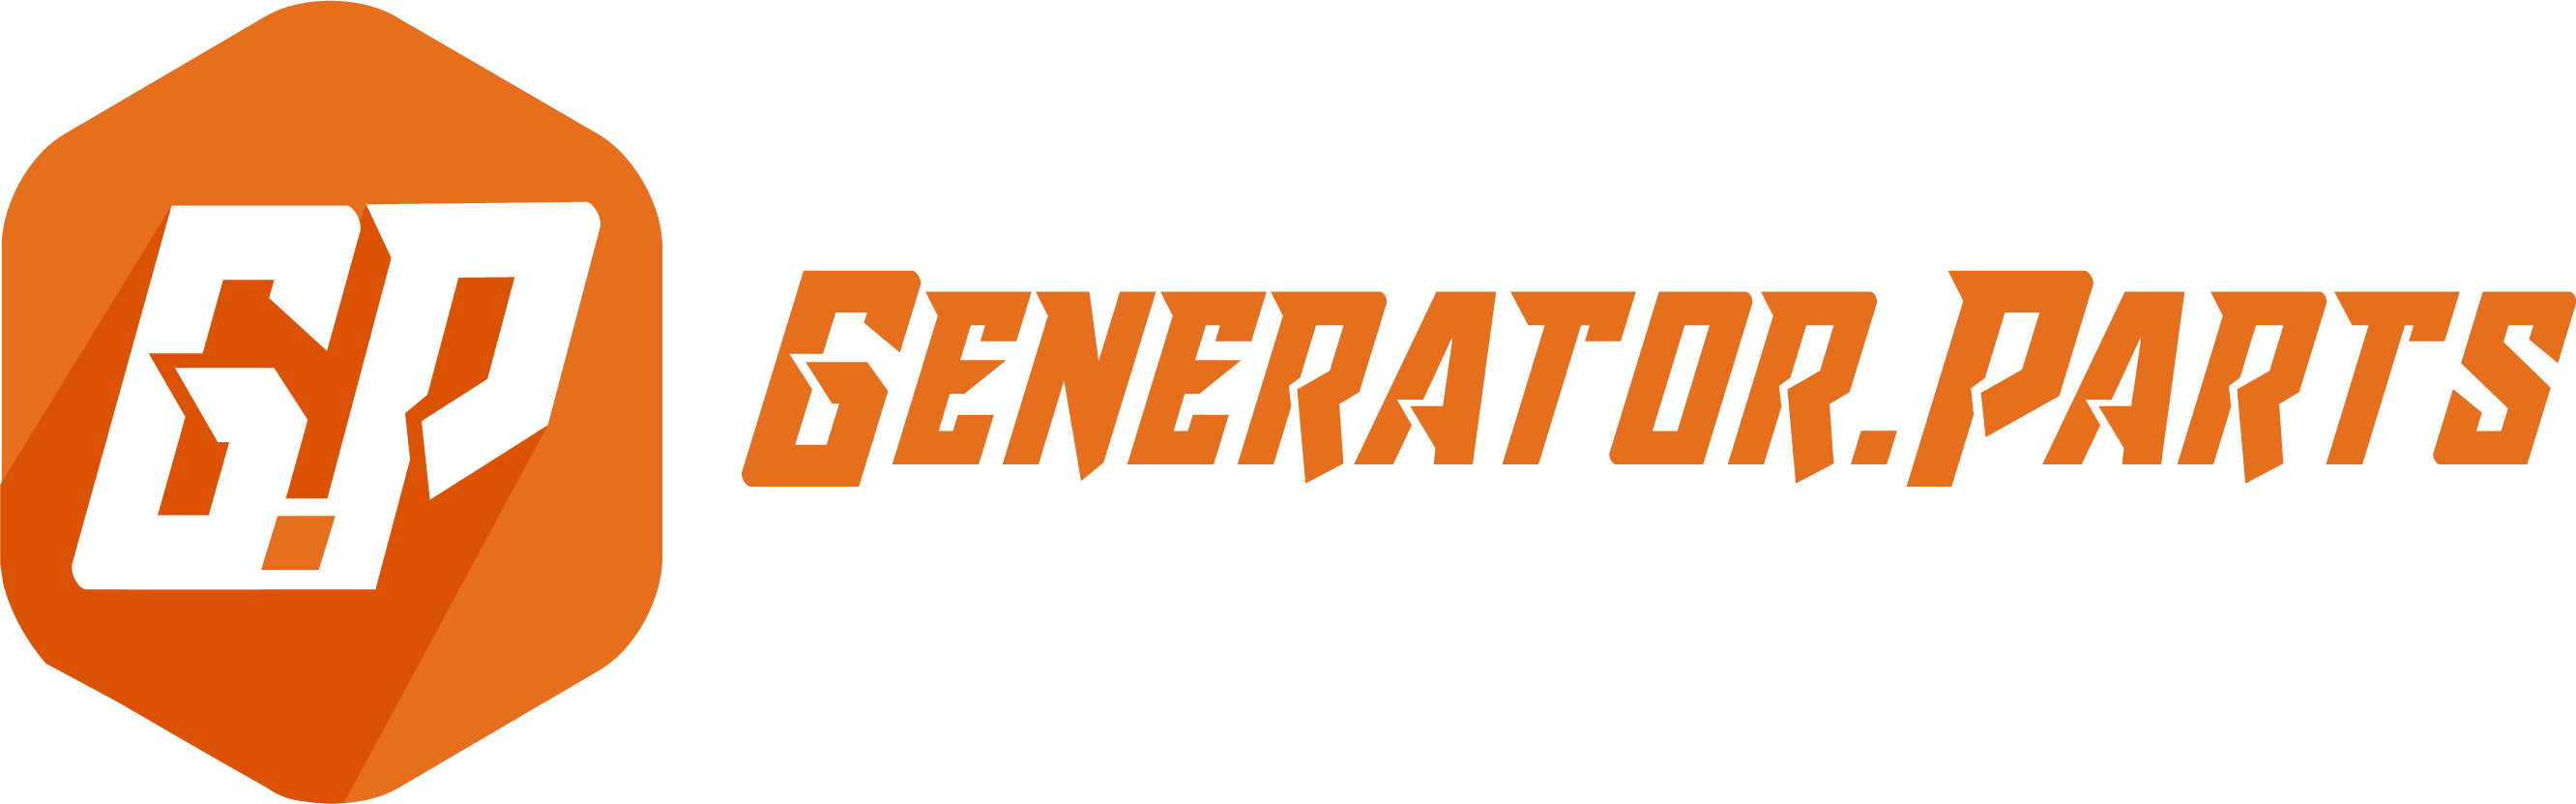 Generator Parts – Home Standby Generators, Power Systems and Parts